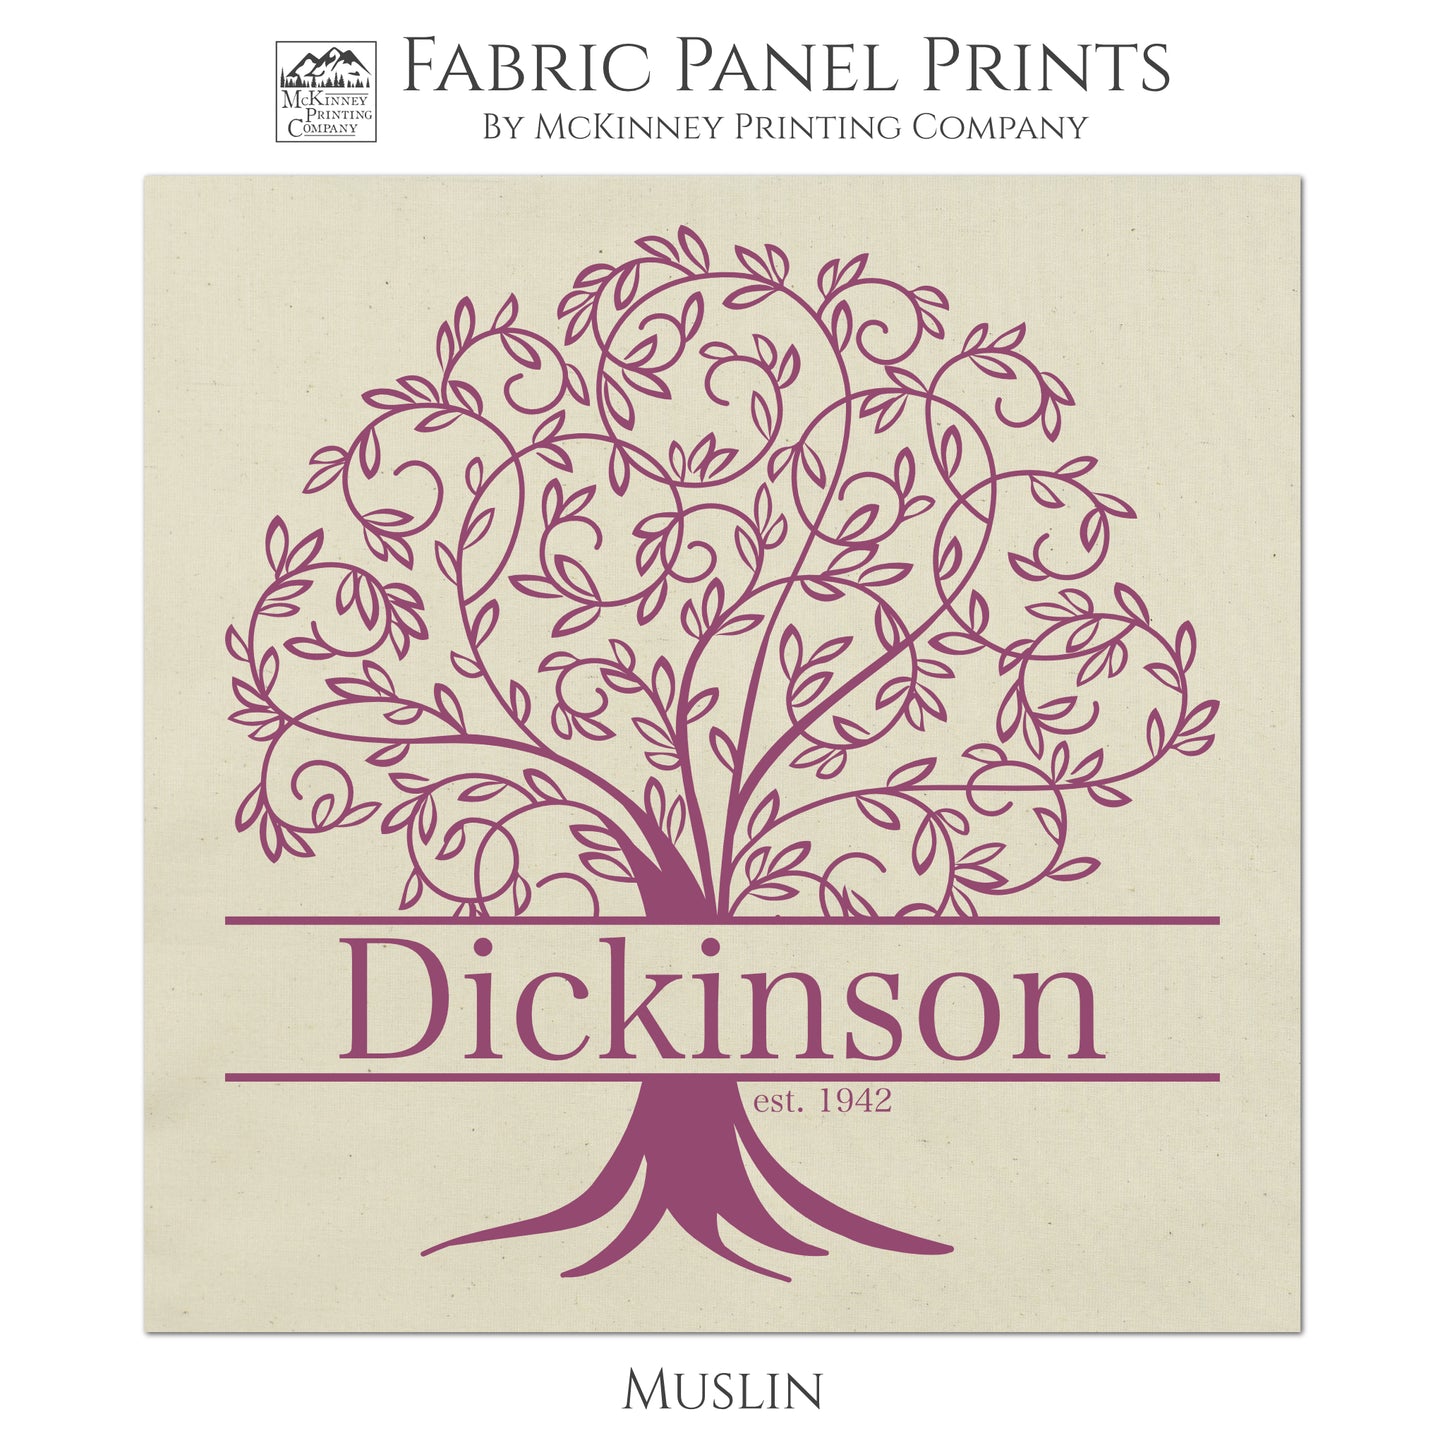 Custom Family Tree - Fabric Panel, Large Print, Tree of Life, Personalized Name, Quilt Block